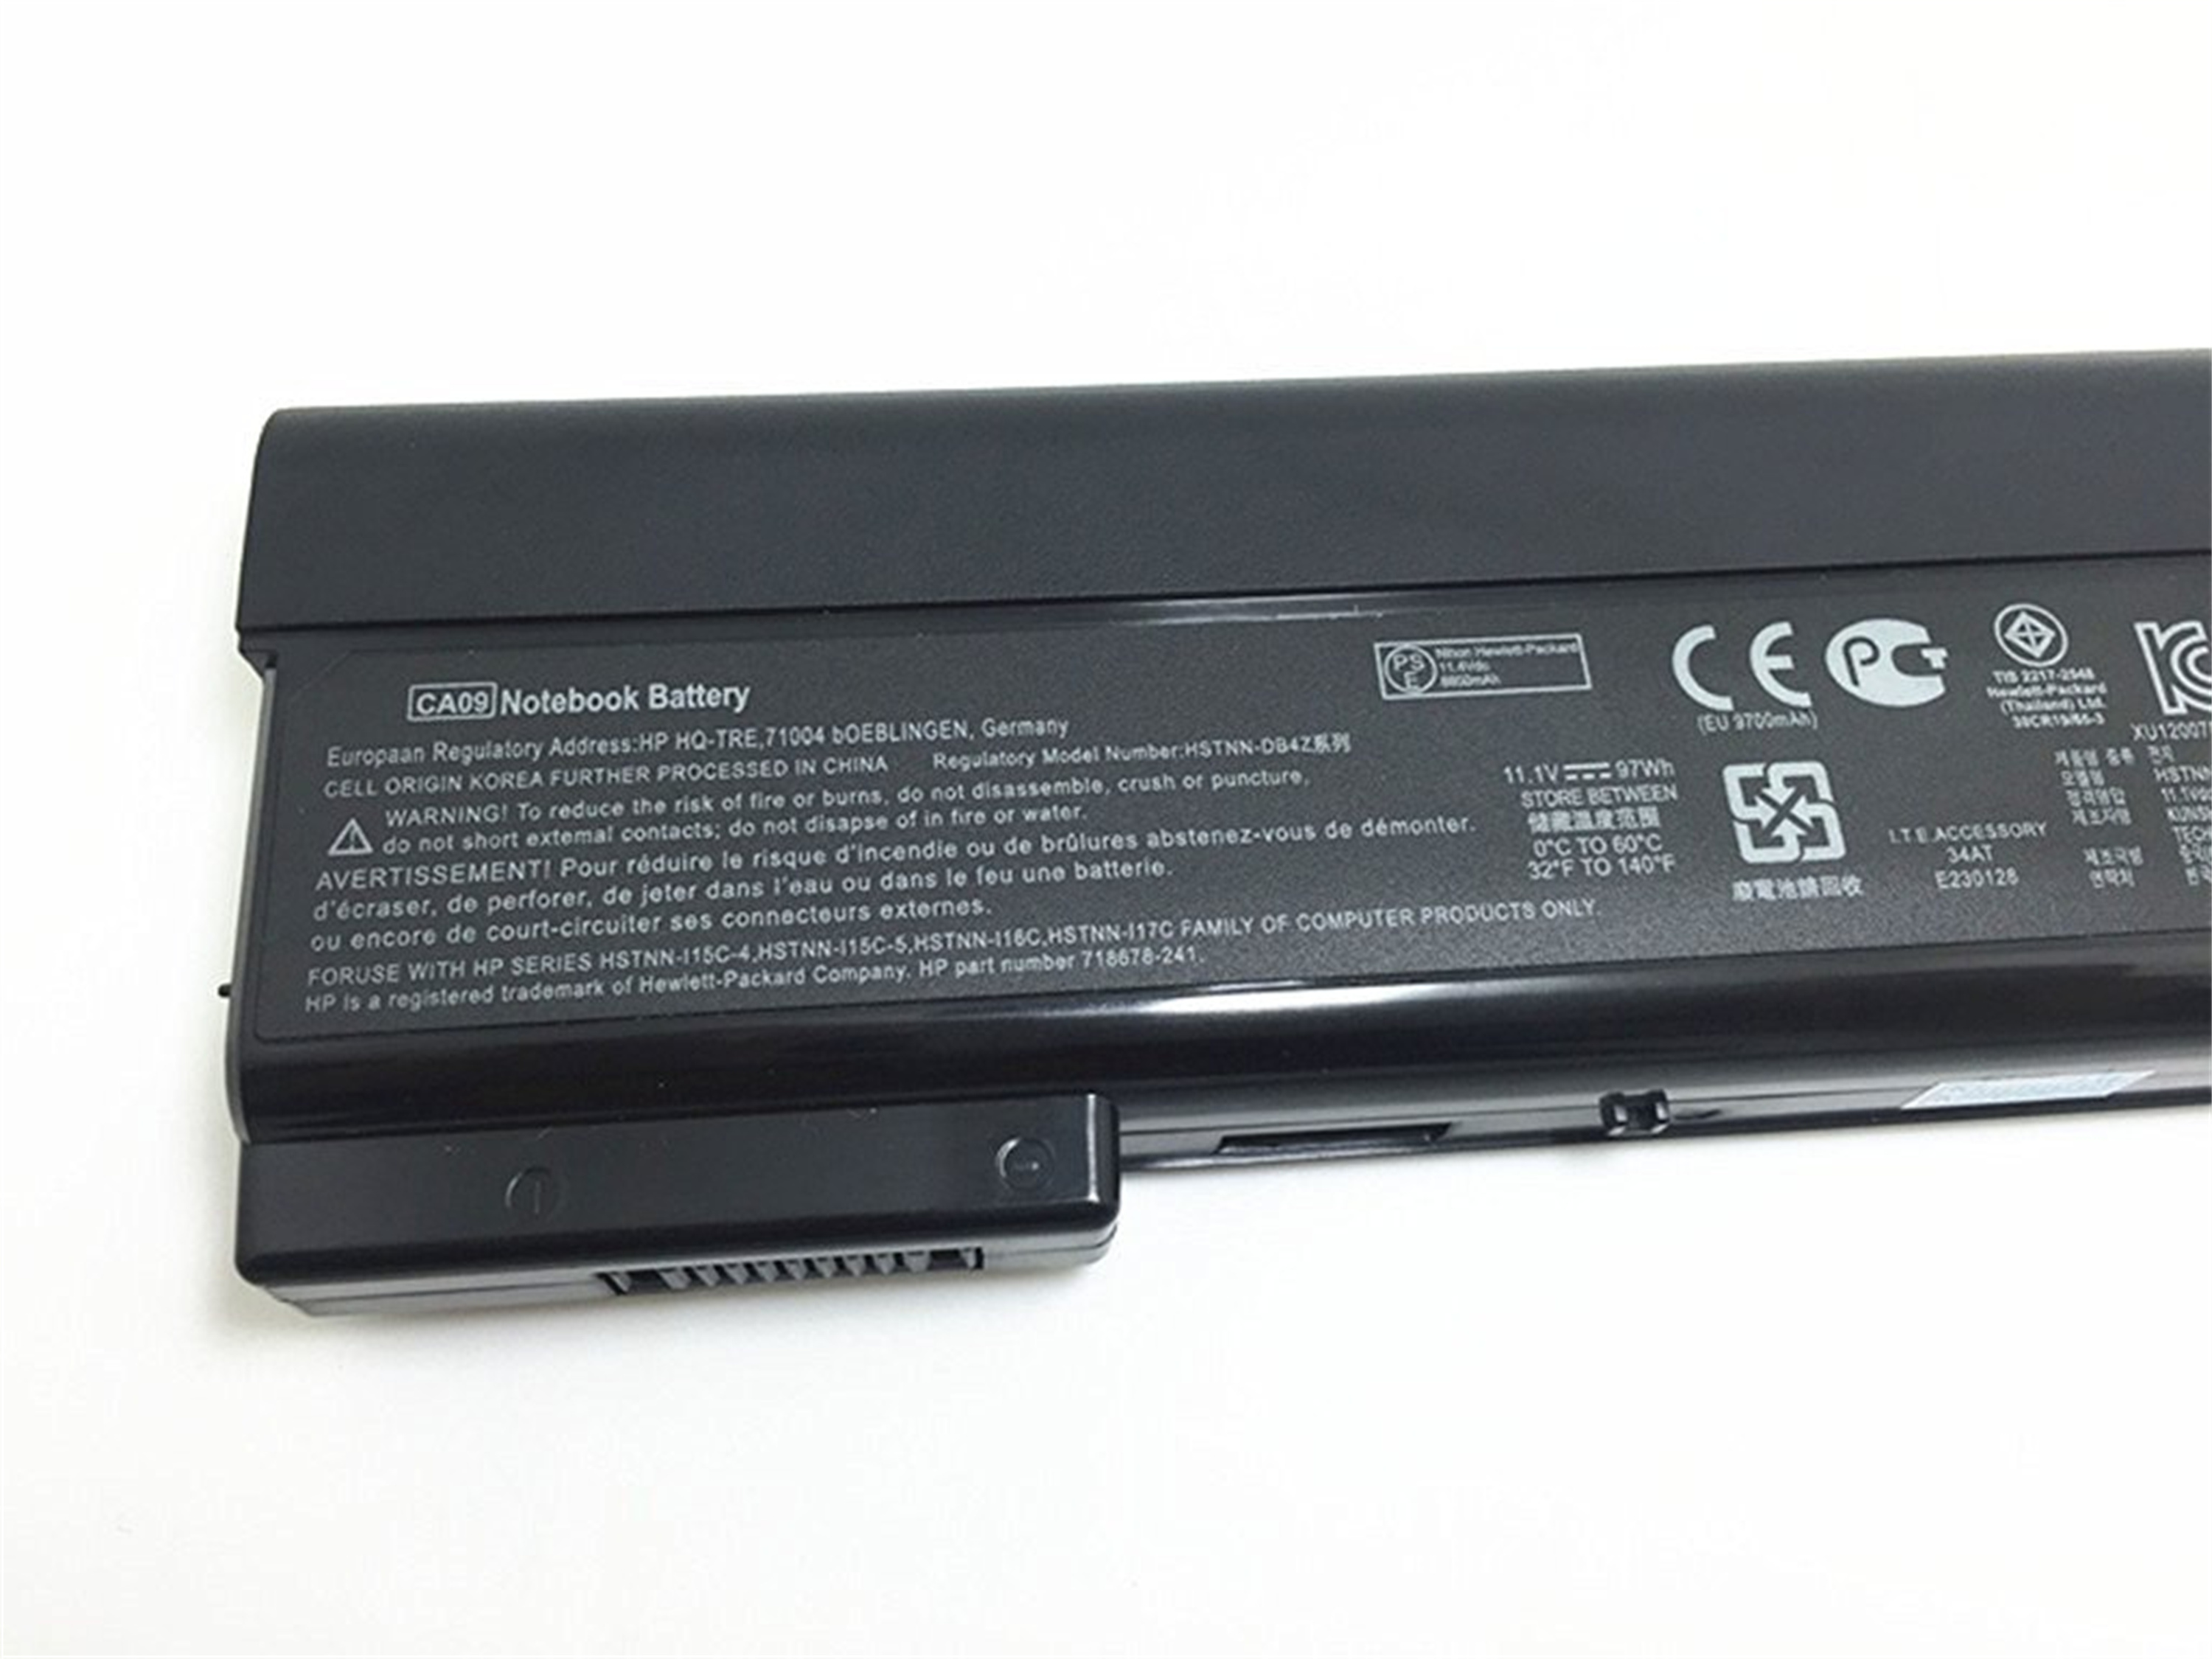 CA09 rechargeable lithium ion Notebook battery Laptop battery CA06XL CA09 11.1V 97Wh for HP laptop ProBook 640 645 650 655 G0 G1 series